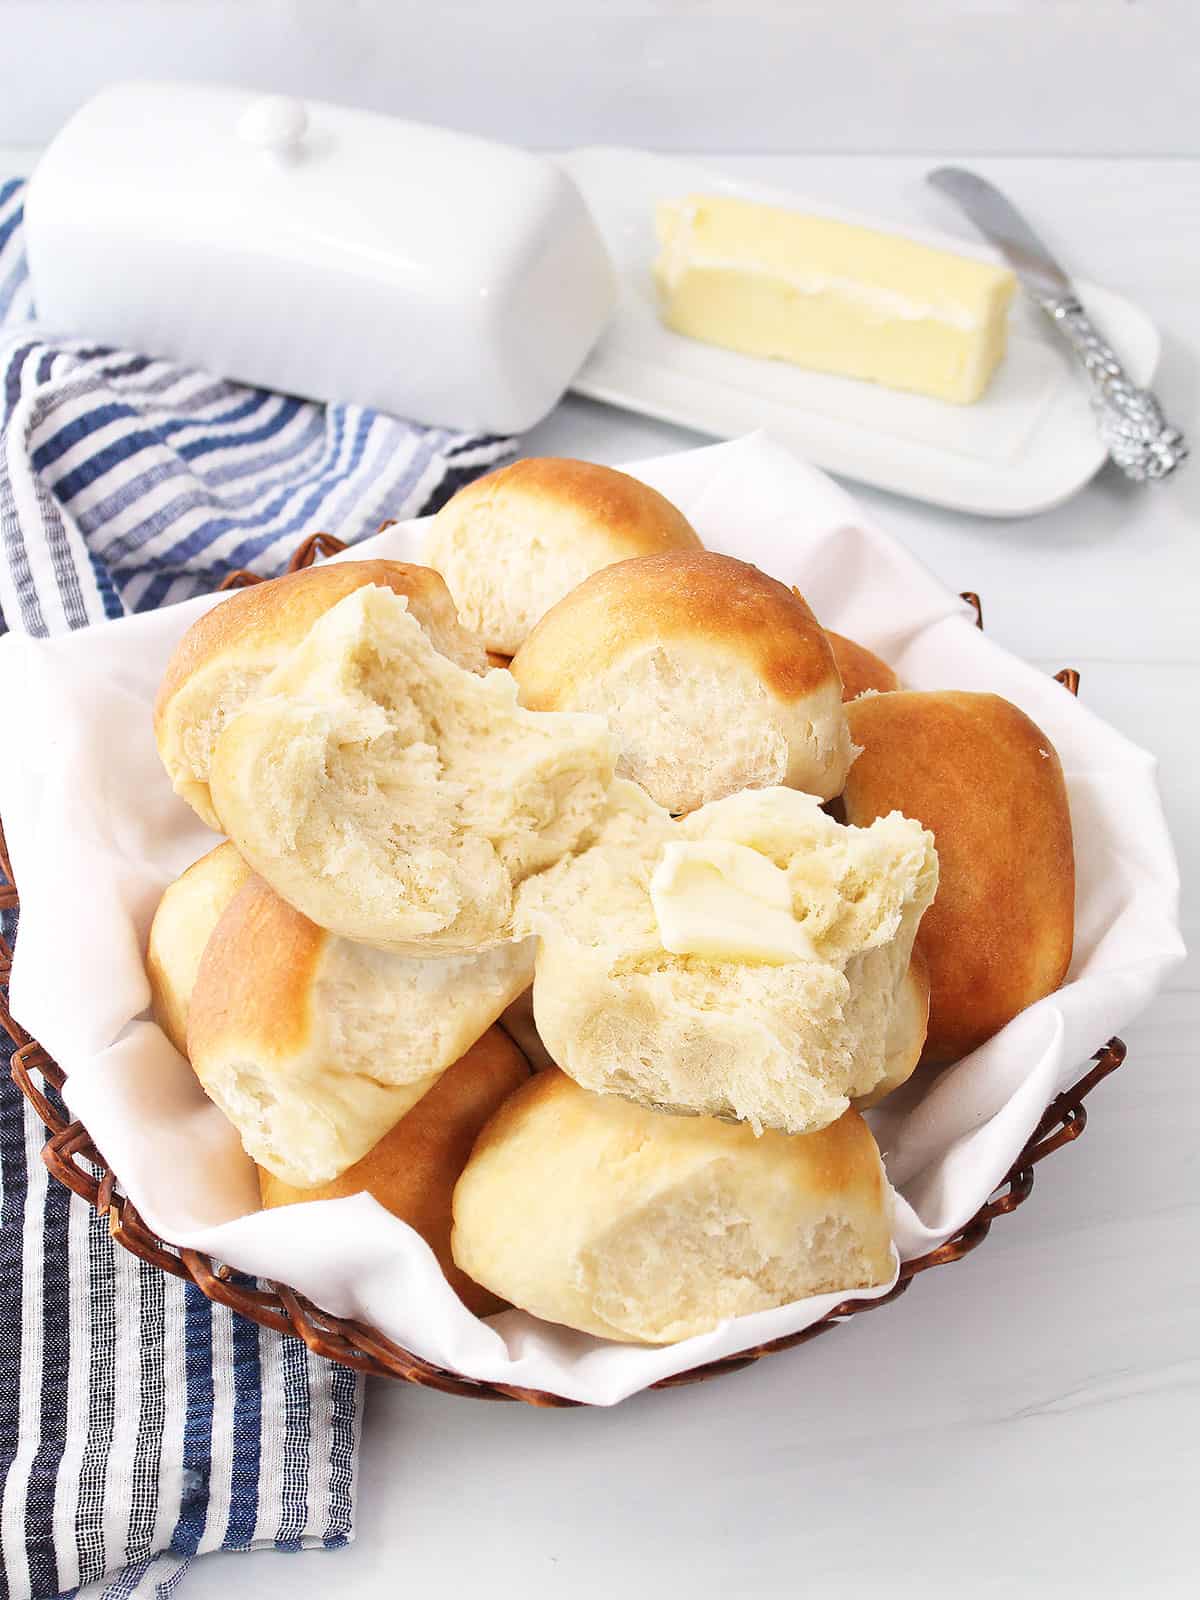 Buttered roll on top of rolls in basket.